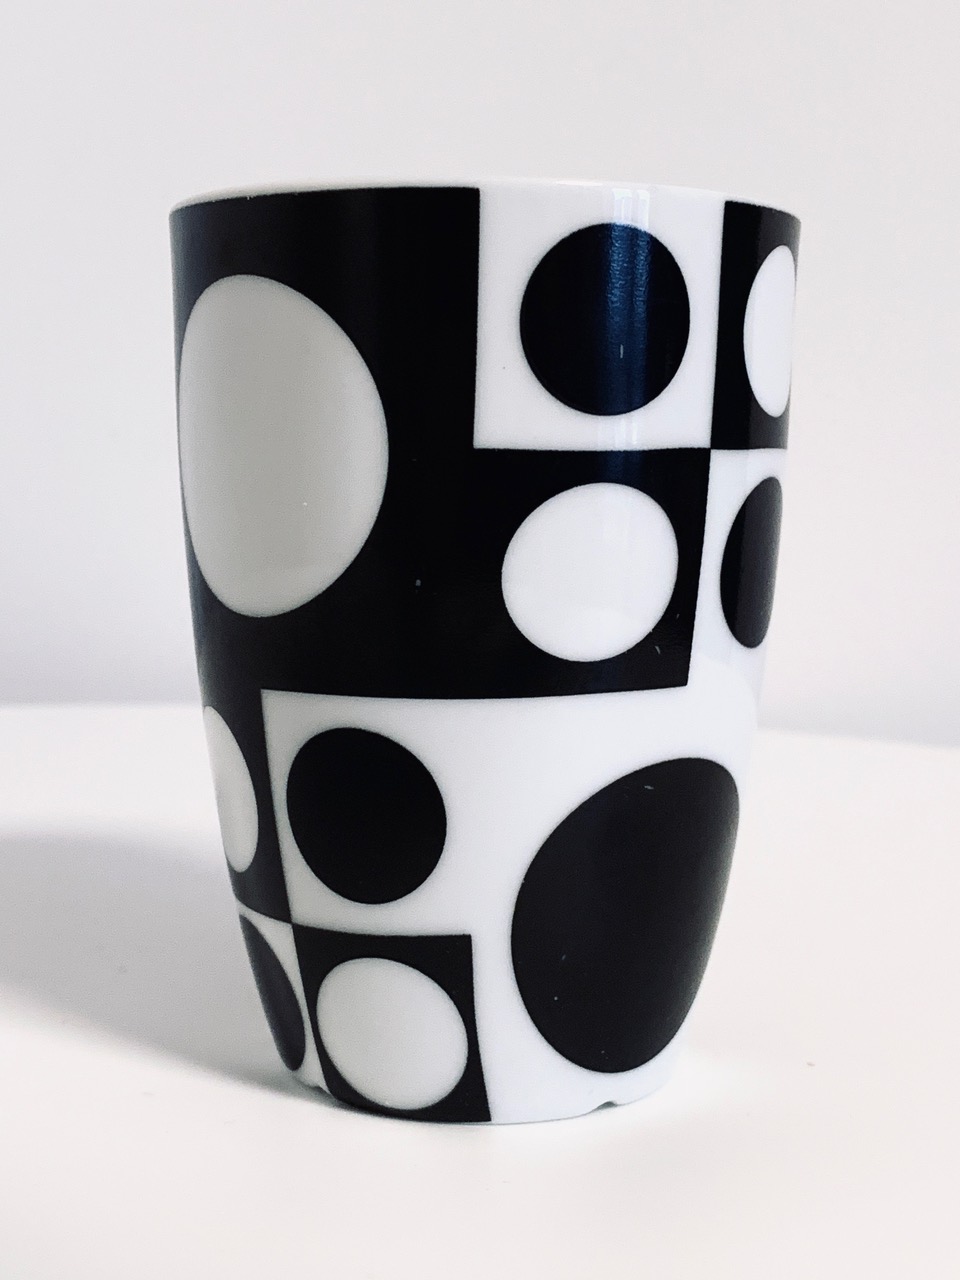 Image of the Verner Panton Menu cup black white 210 ml offered in this advertisement.